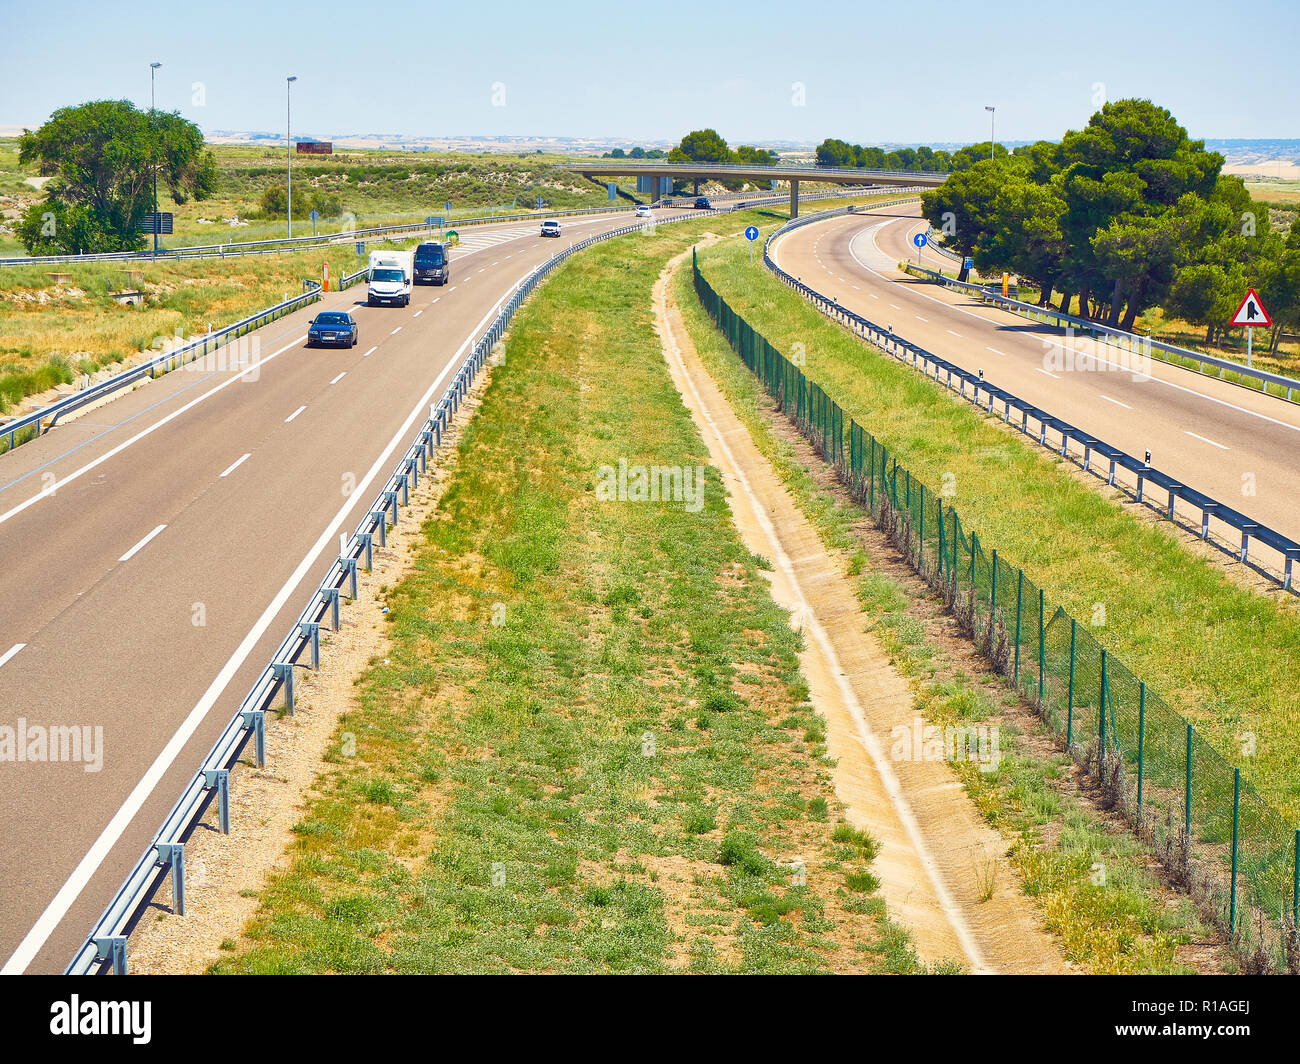 Vehicles crossing a european highway at a sunny day. Stock Photo